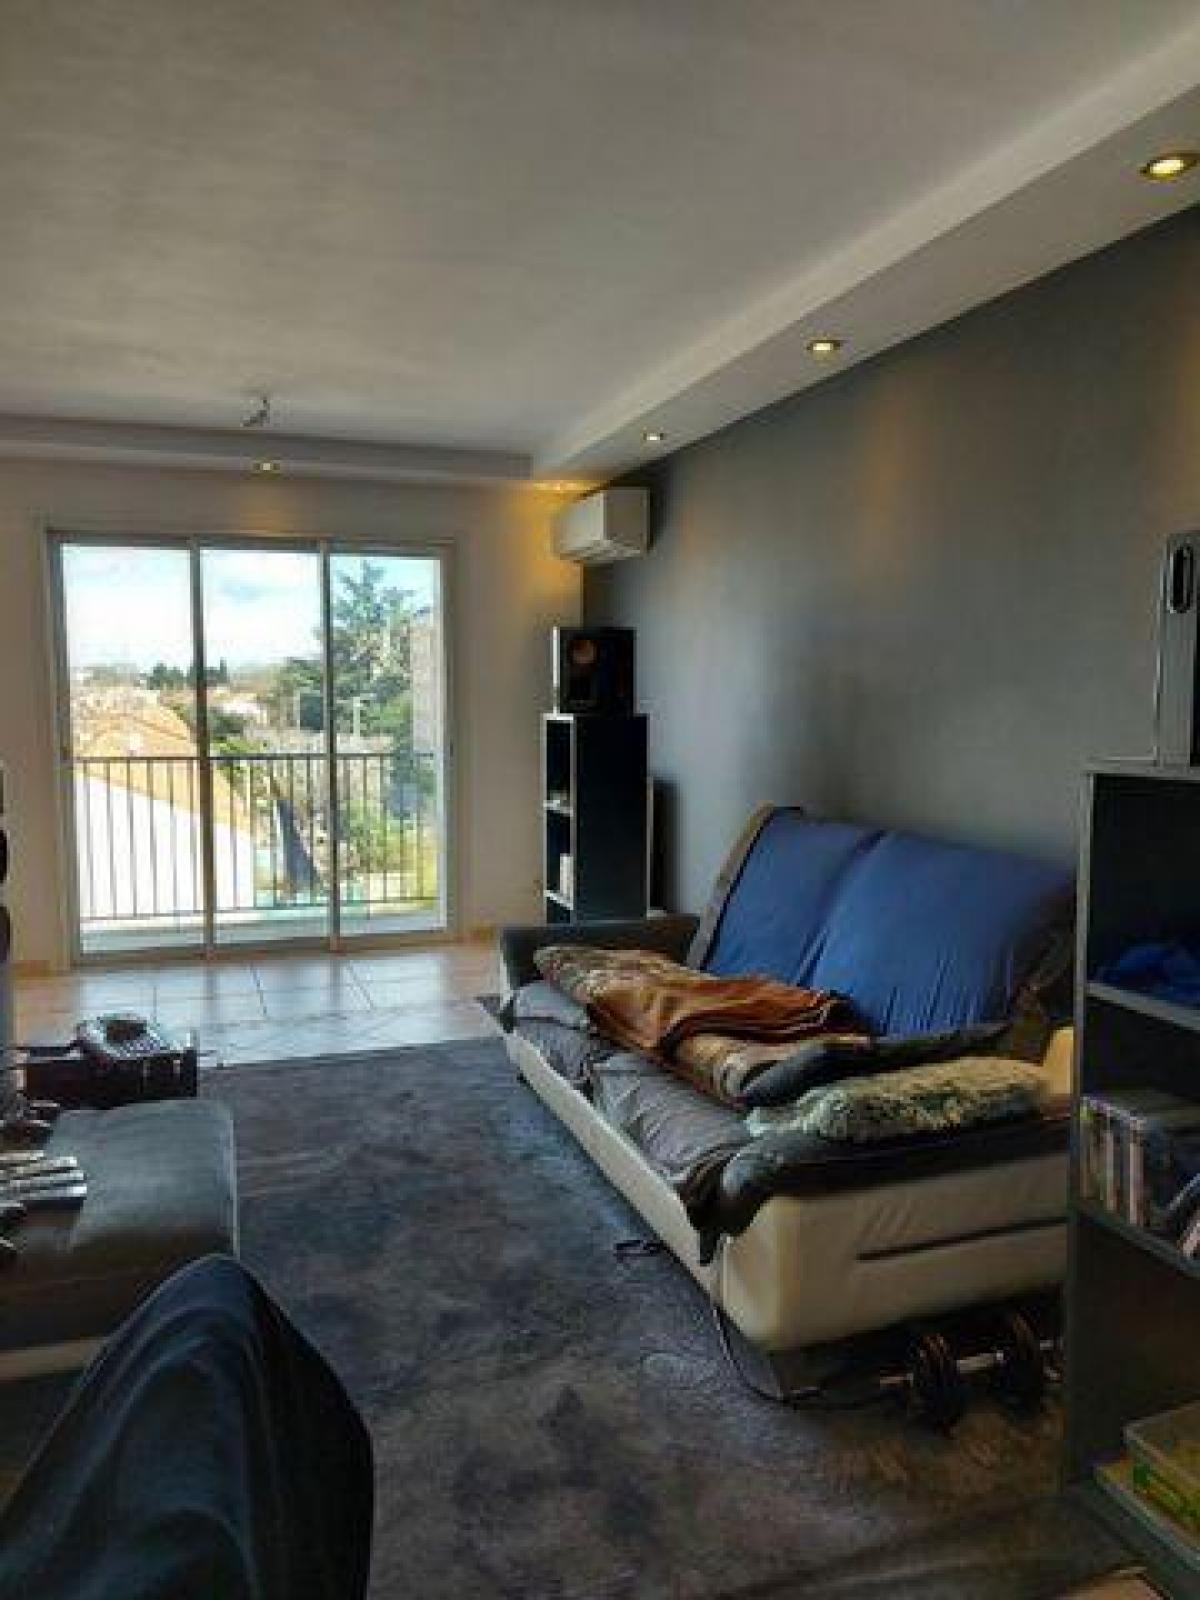 Picture of Apartment For Sale in Nimes, Languedoc Roussillon, France